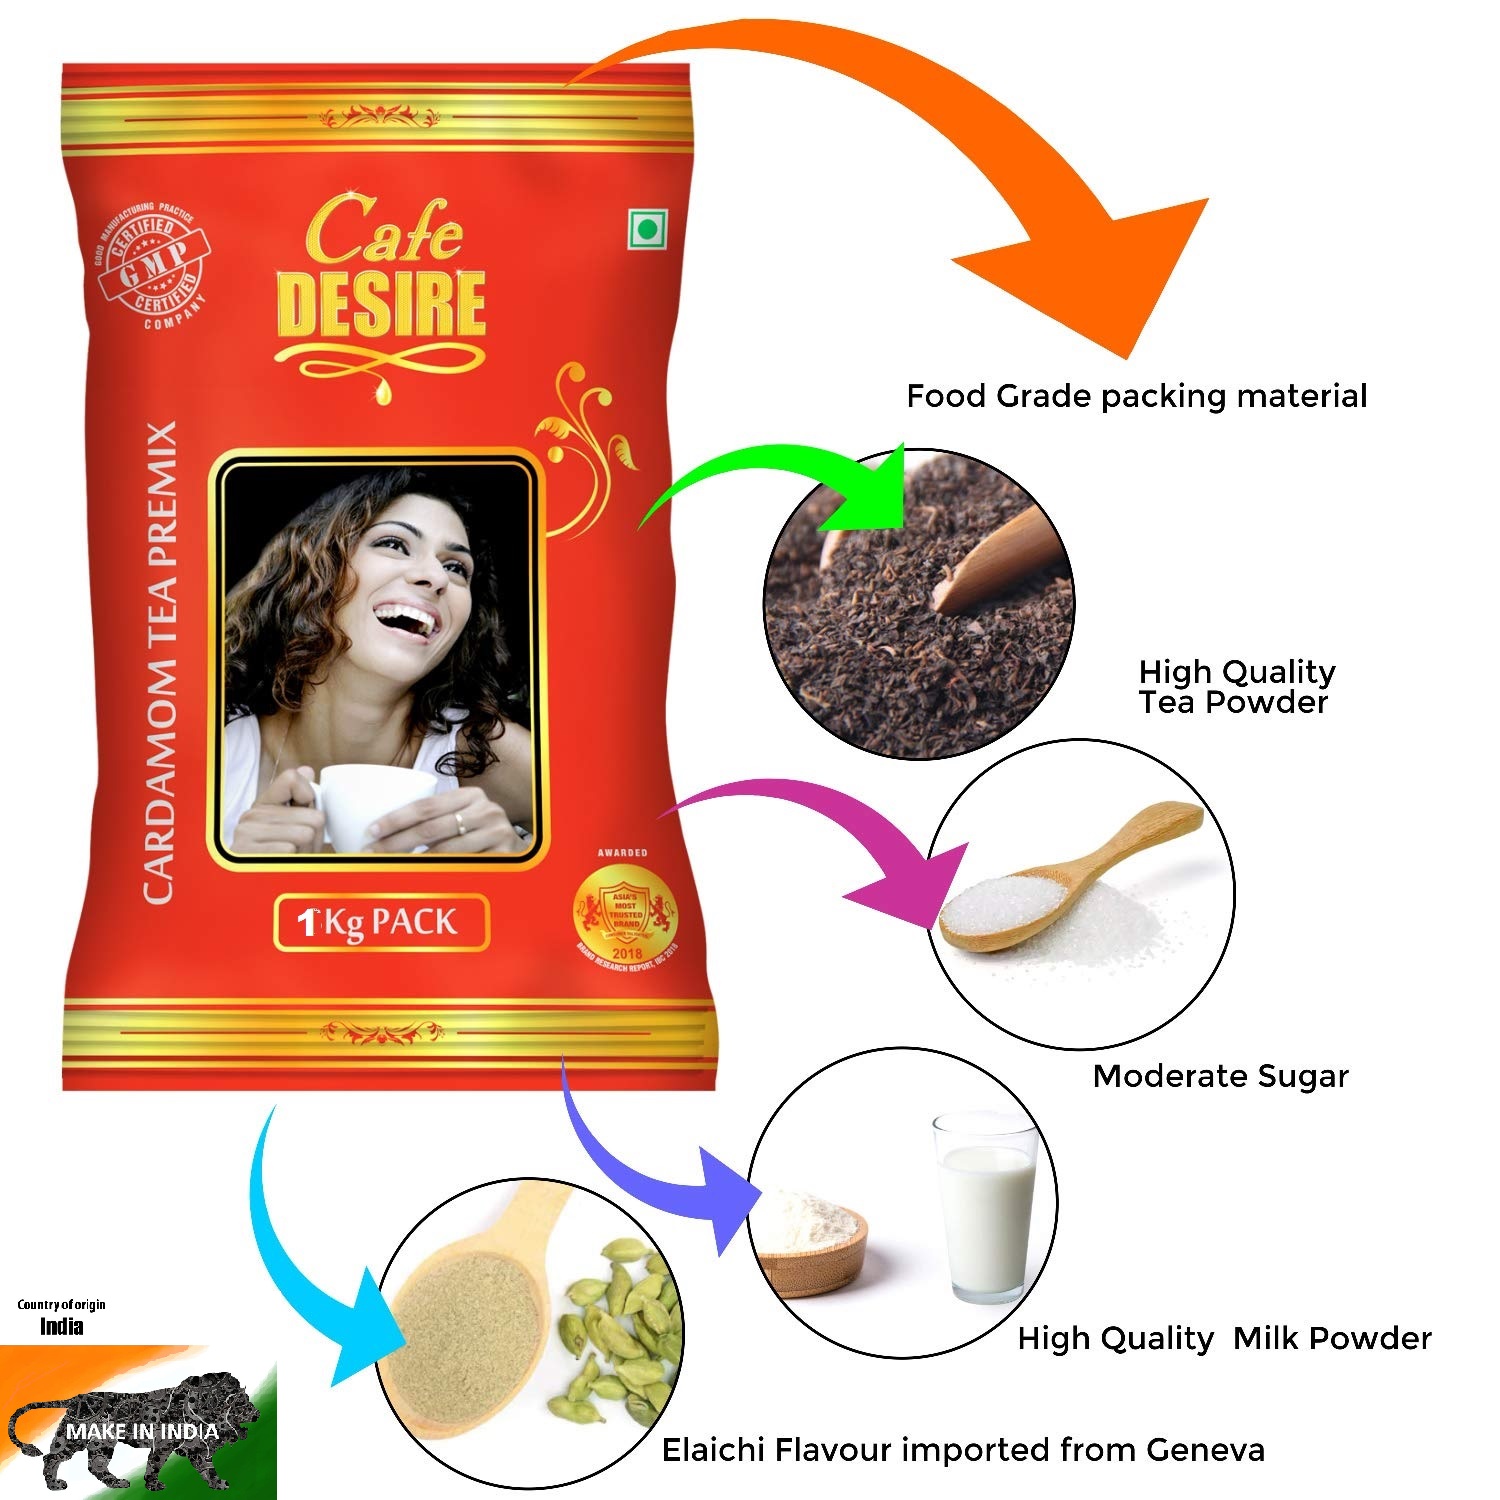 Red-Pack Cardamom Tea Premix from Laxmi Cafe Desire